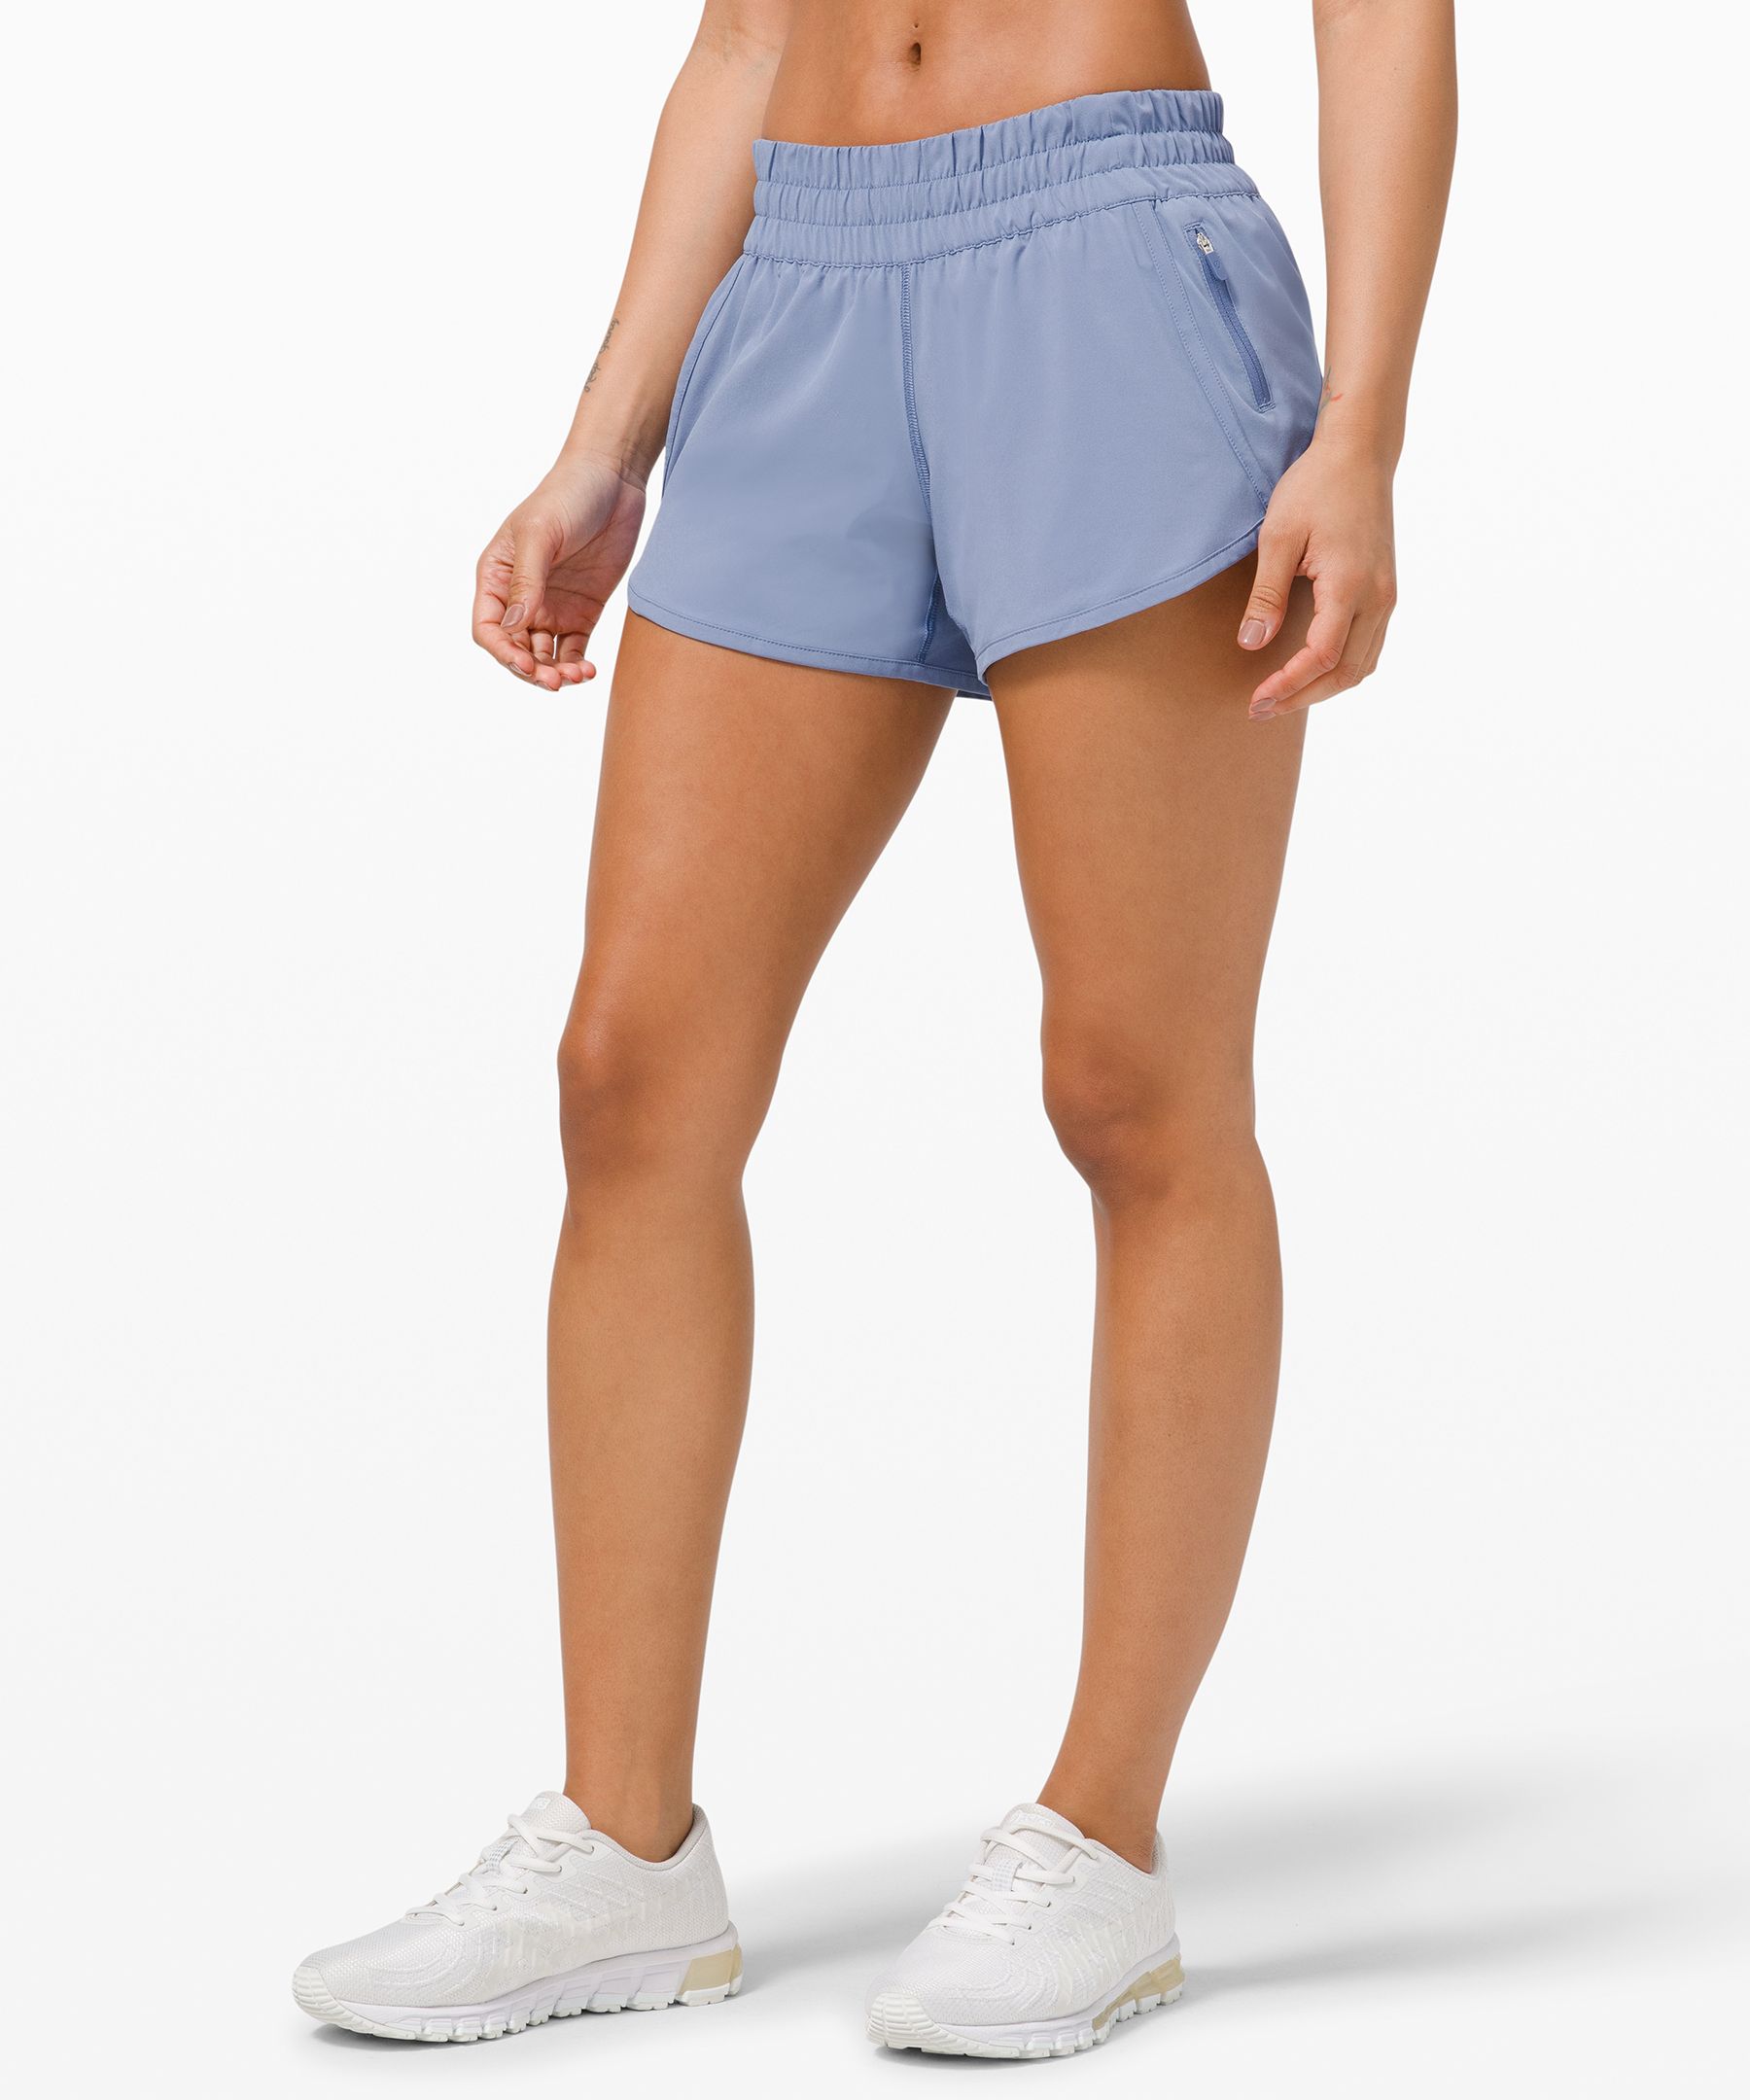 Tracker Low-Rise Lined Short 4, Women's Shorts